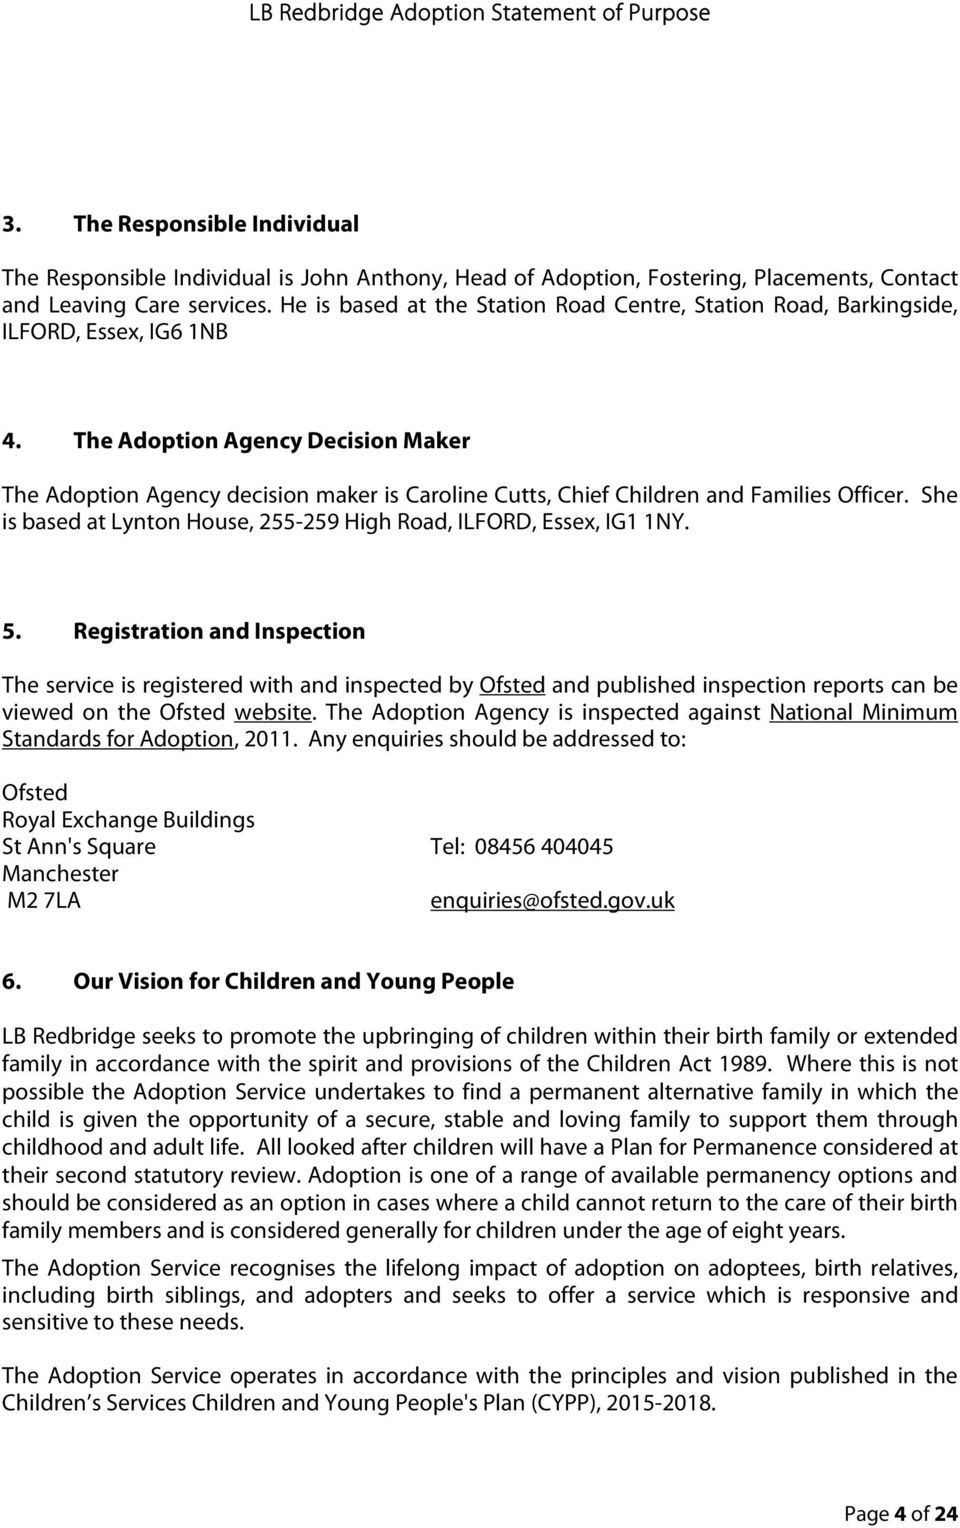 The Adoption Agency Decision Maker The Adoption Agency decision maker is Caroline Cutts, Chief Children and Families Officer. She is based at Lynton House, 255-259 High Road, ILFORD, Essex, IG1 1NY.